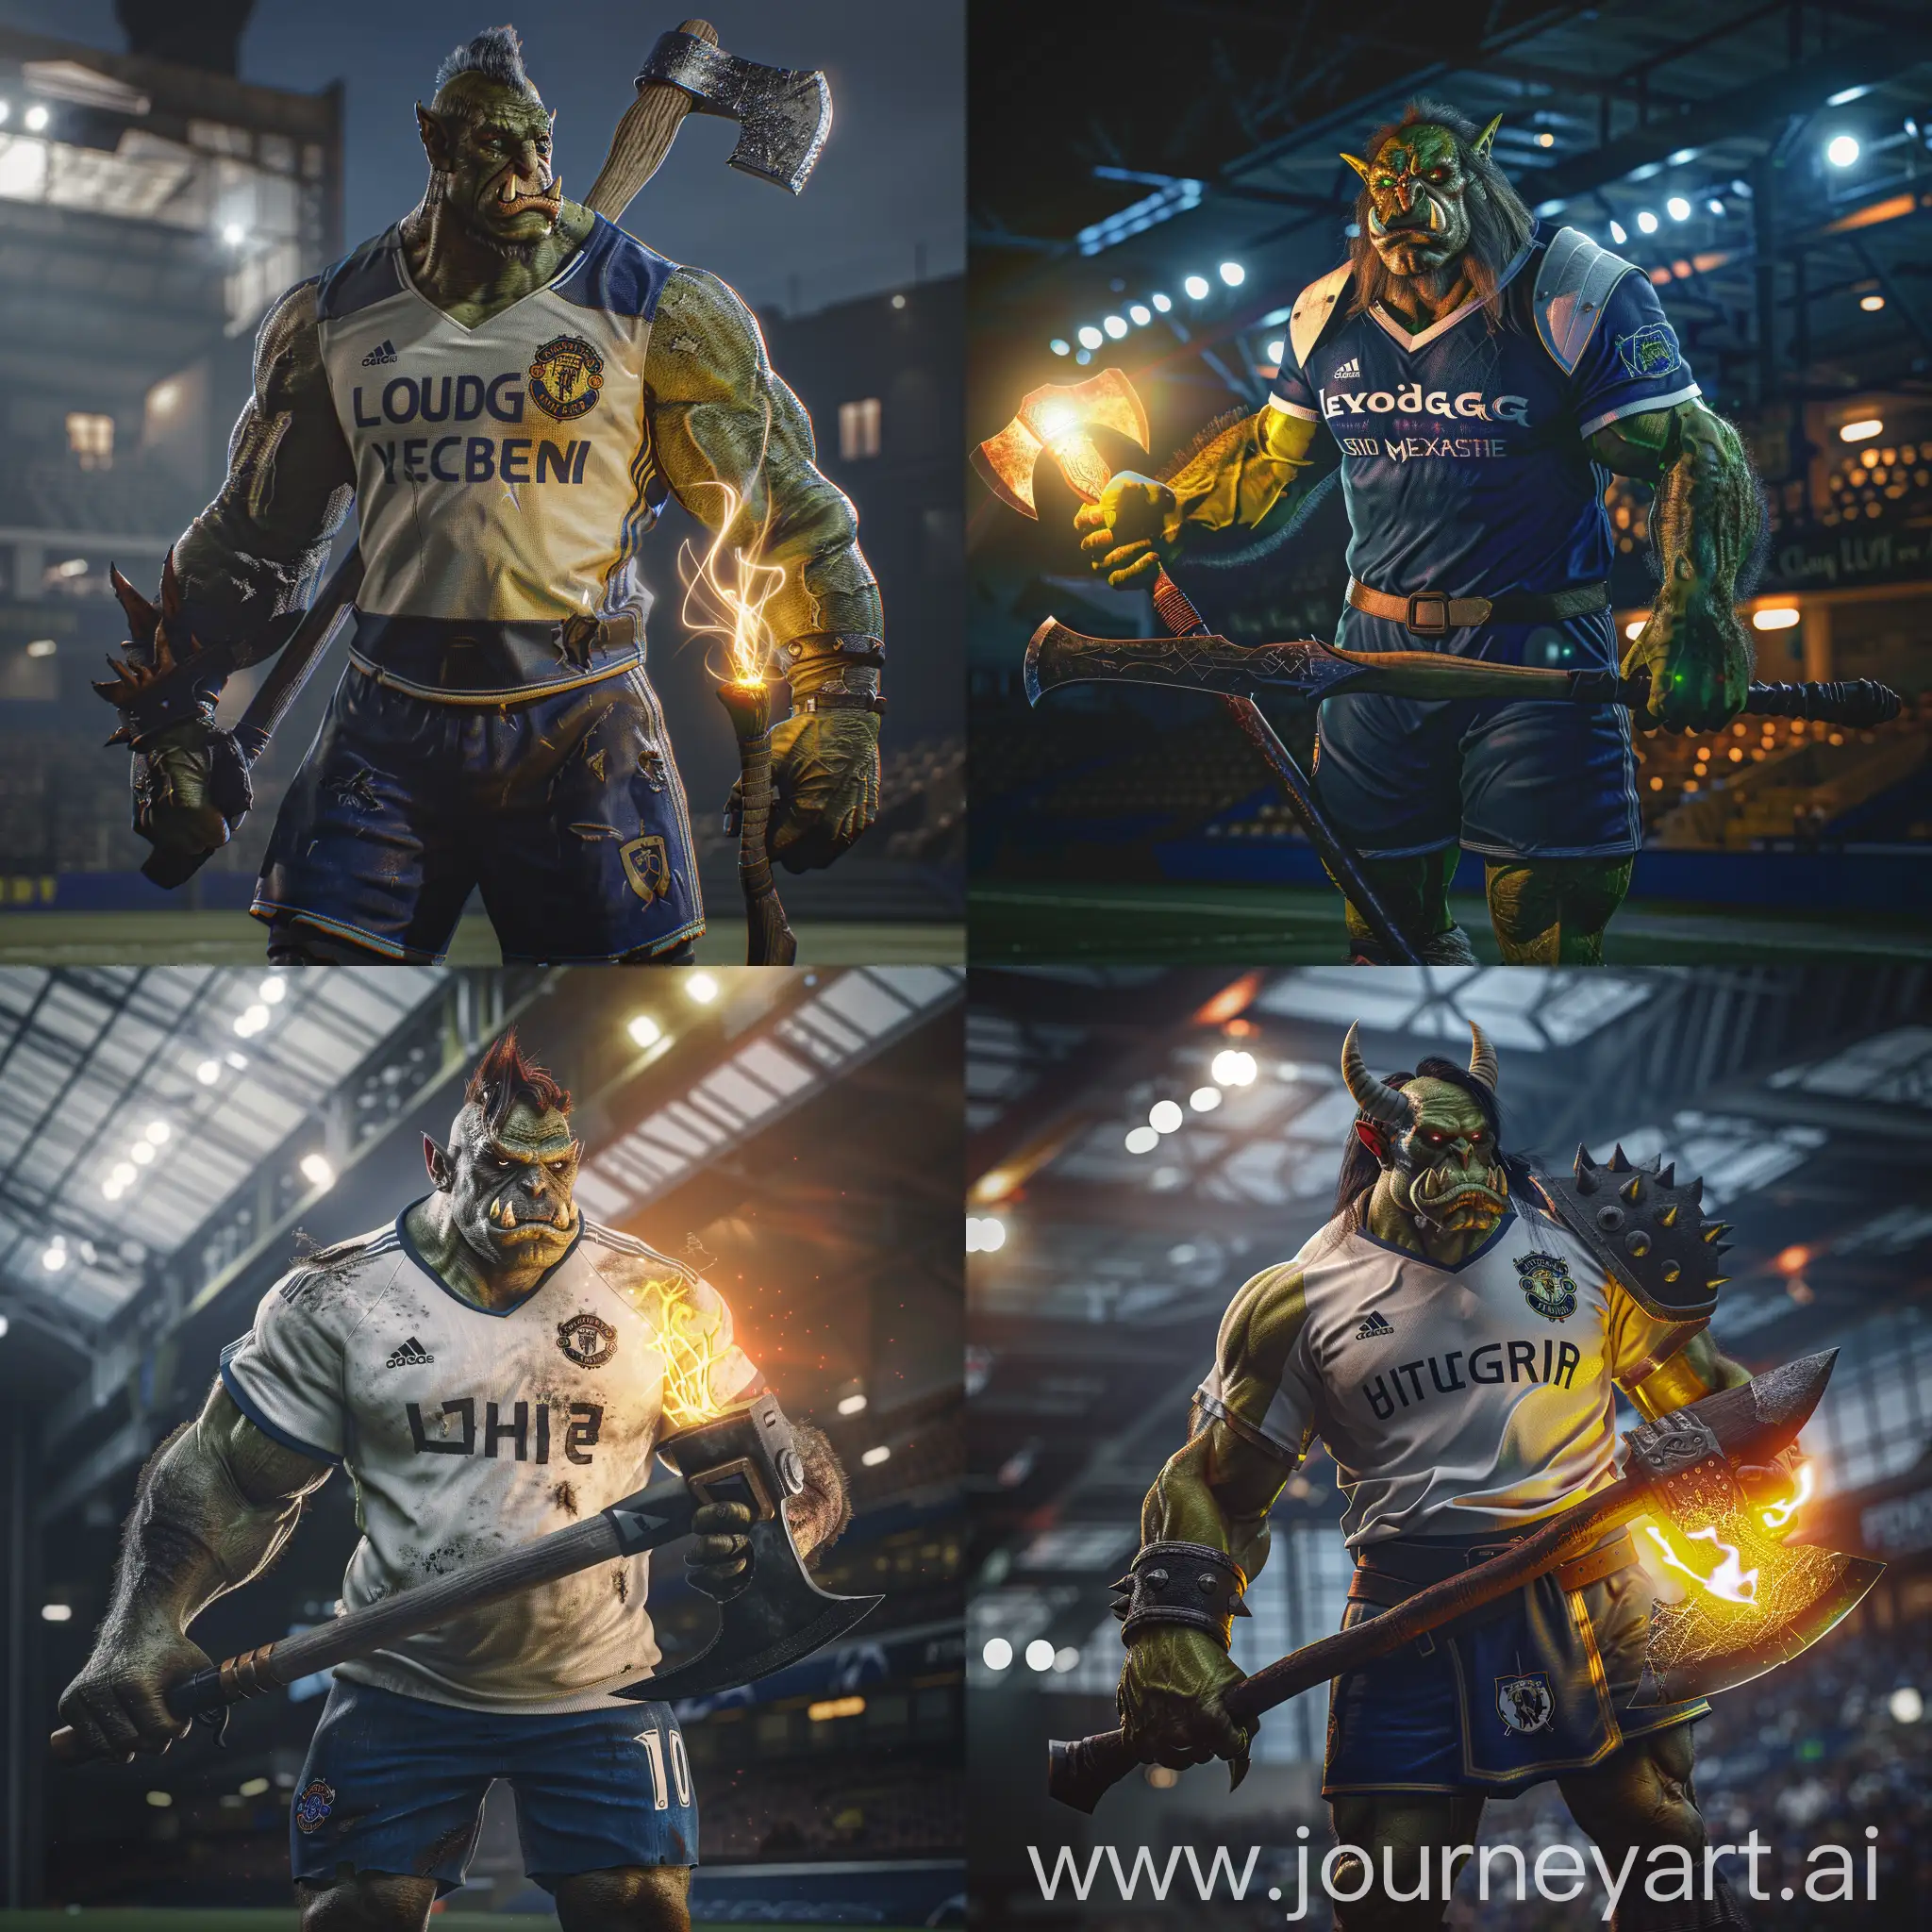 Create a photorealistic photo of a half orc barbarian wearing a leeds united football shirt standing in elland road stadium holding a glowing greataxe